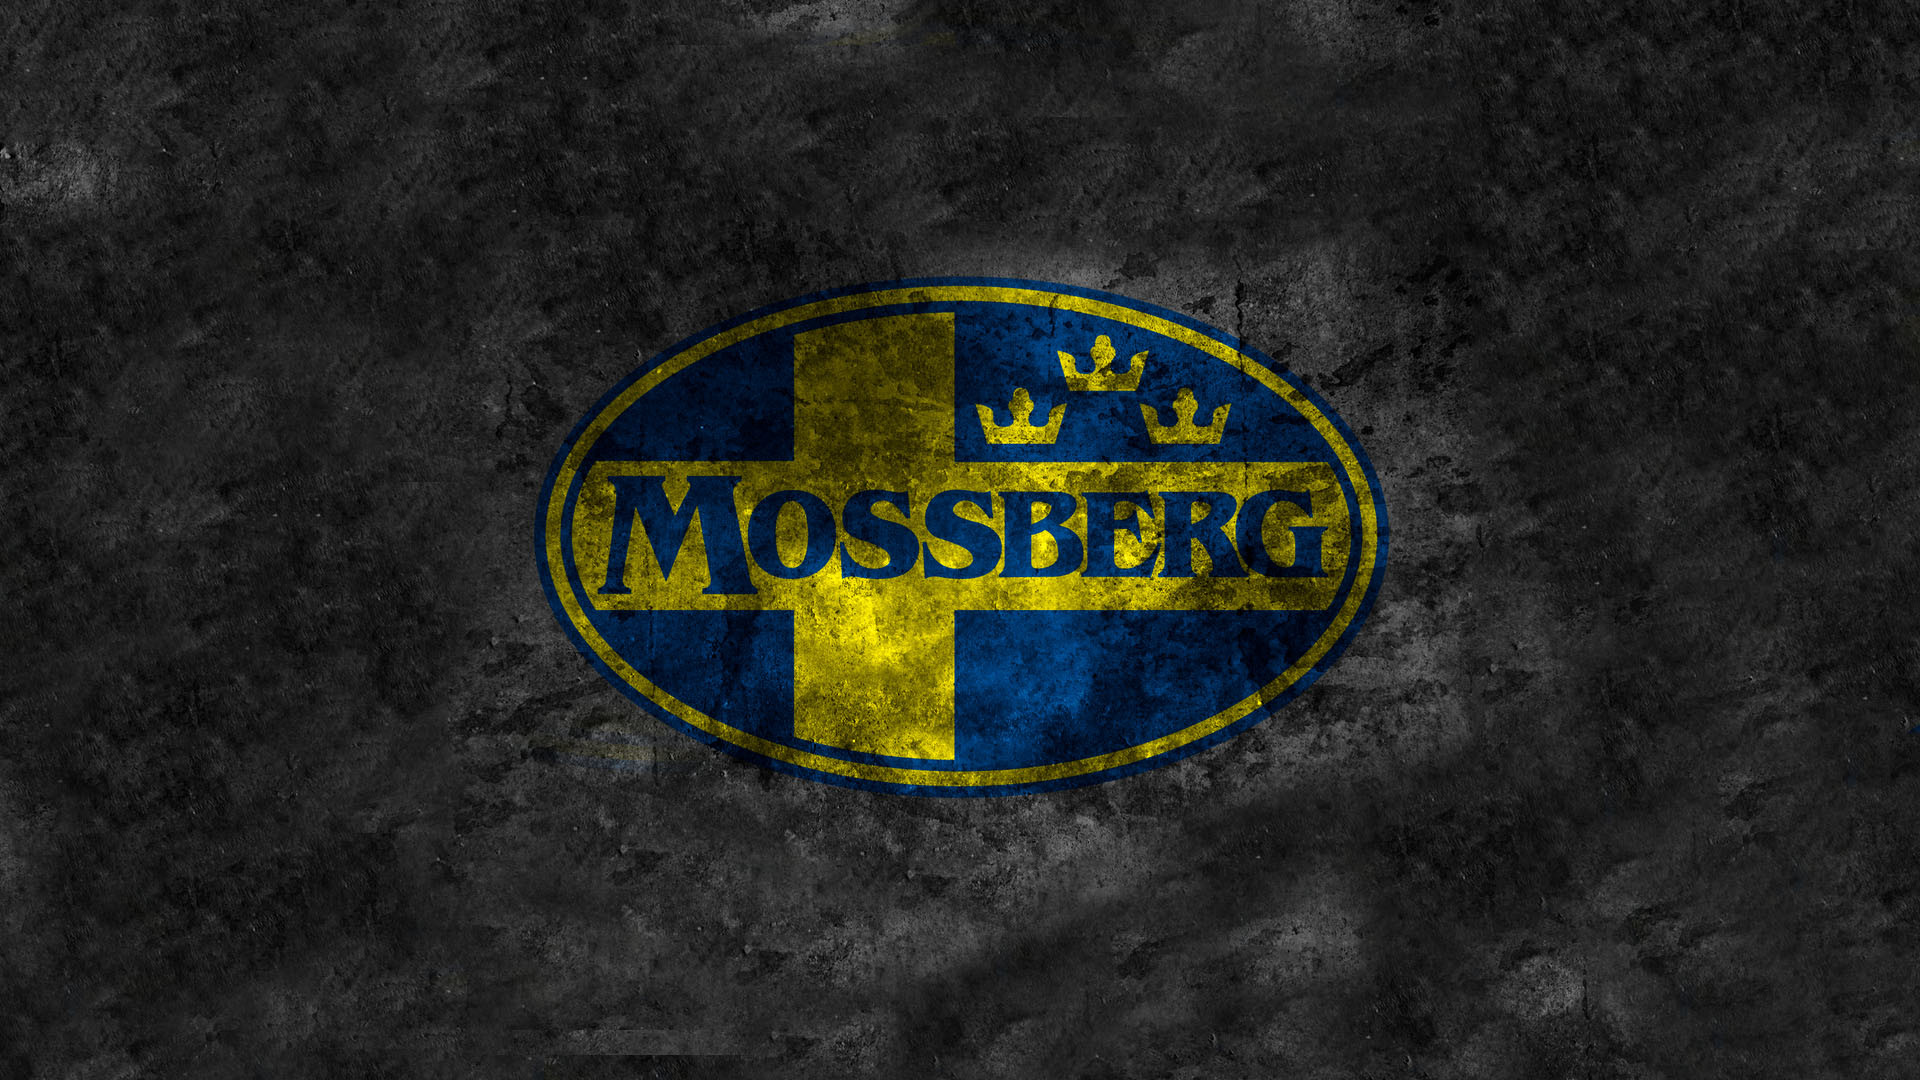 1920x1080 Mossberg HD Wallpapers | Backgrounds - Wallpaper Abyss